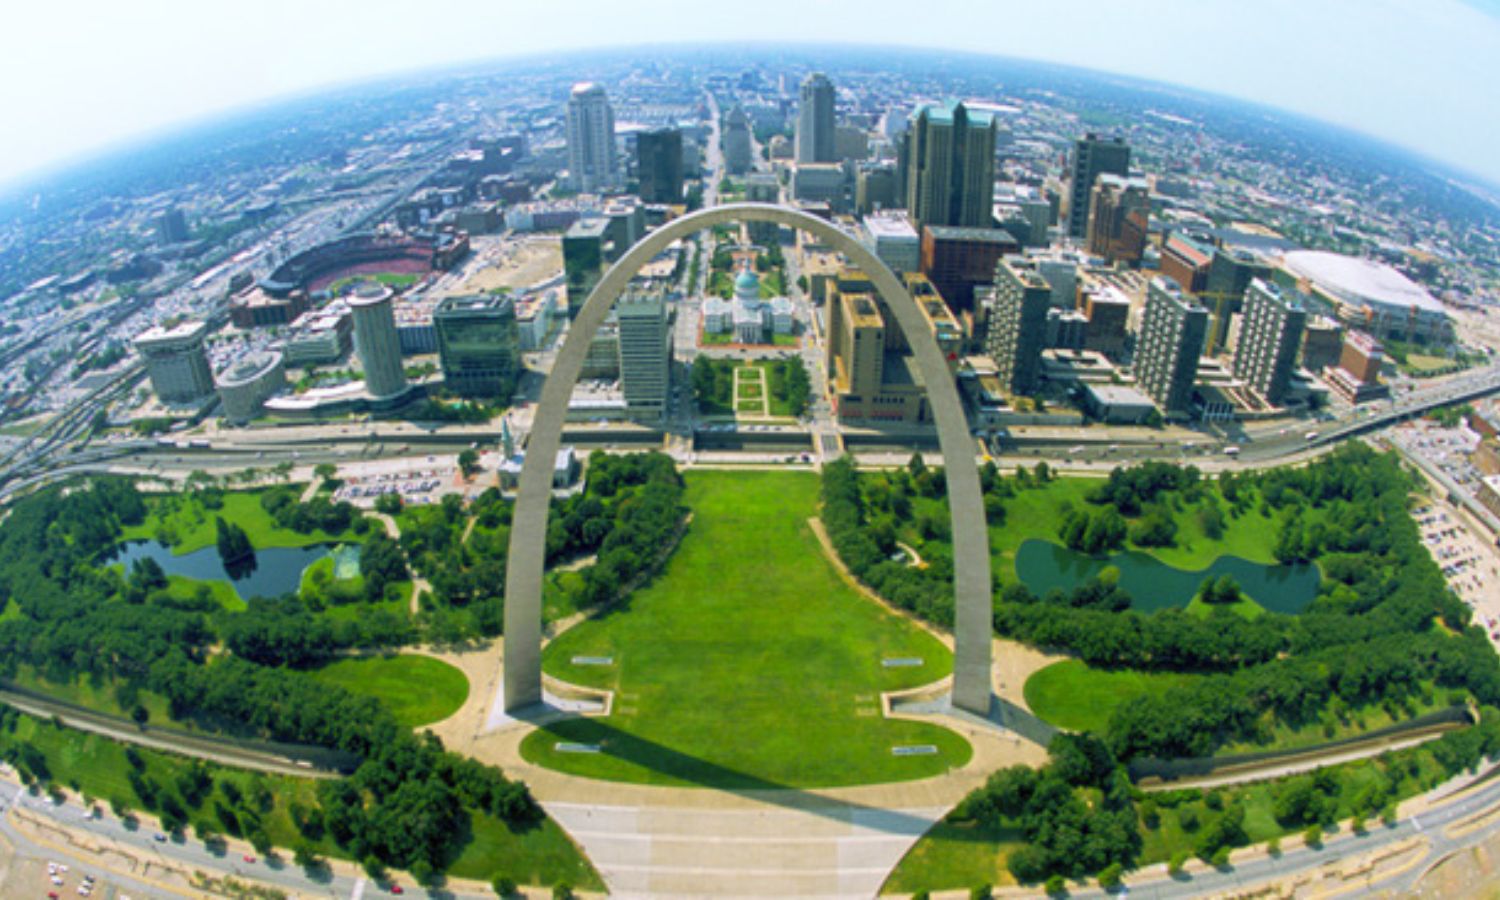 Free Things to Do in Saint Louis